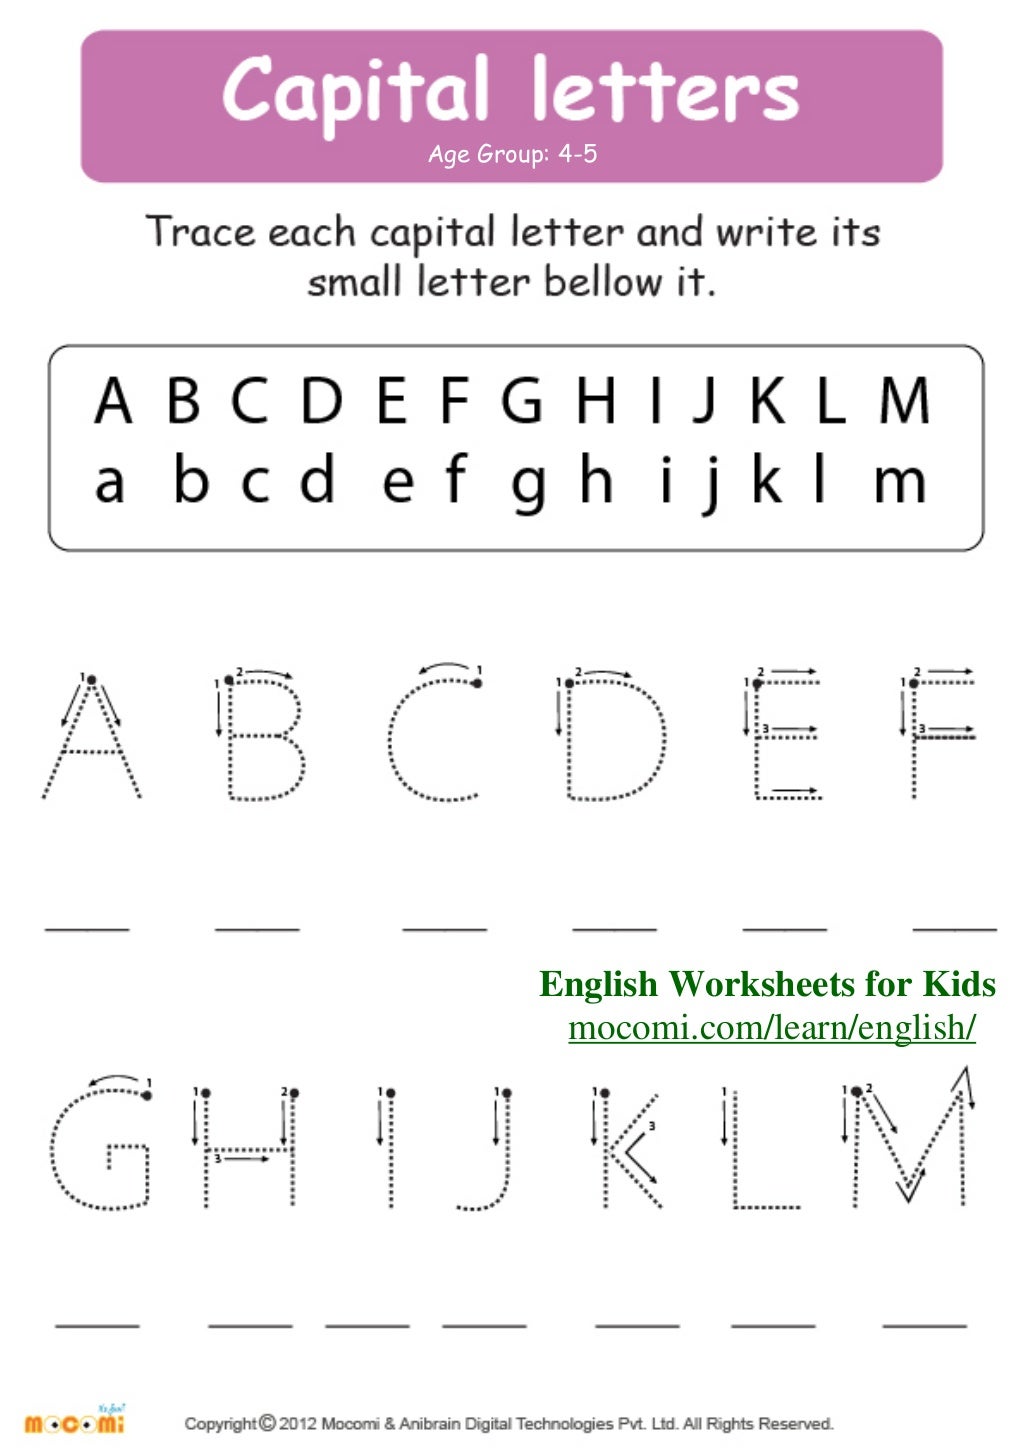 capital-letters-english-worksheets-for-kids-mocomi